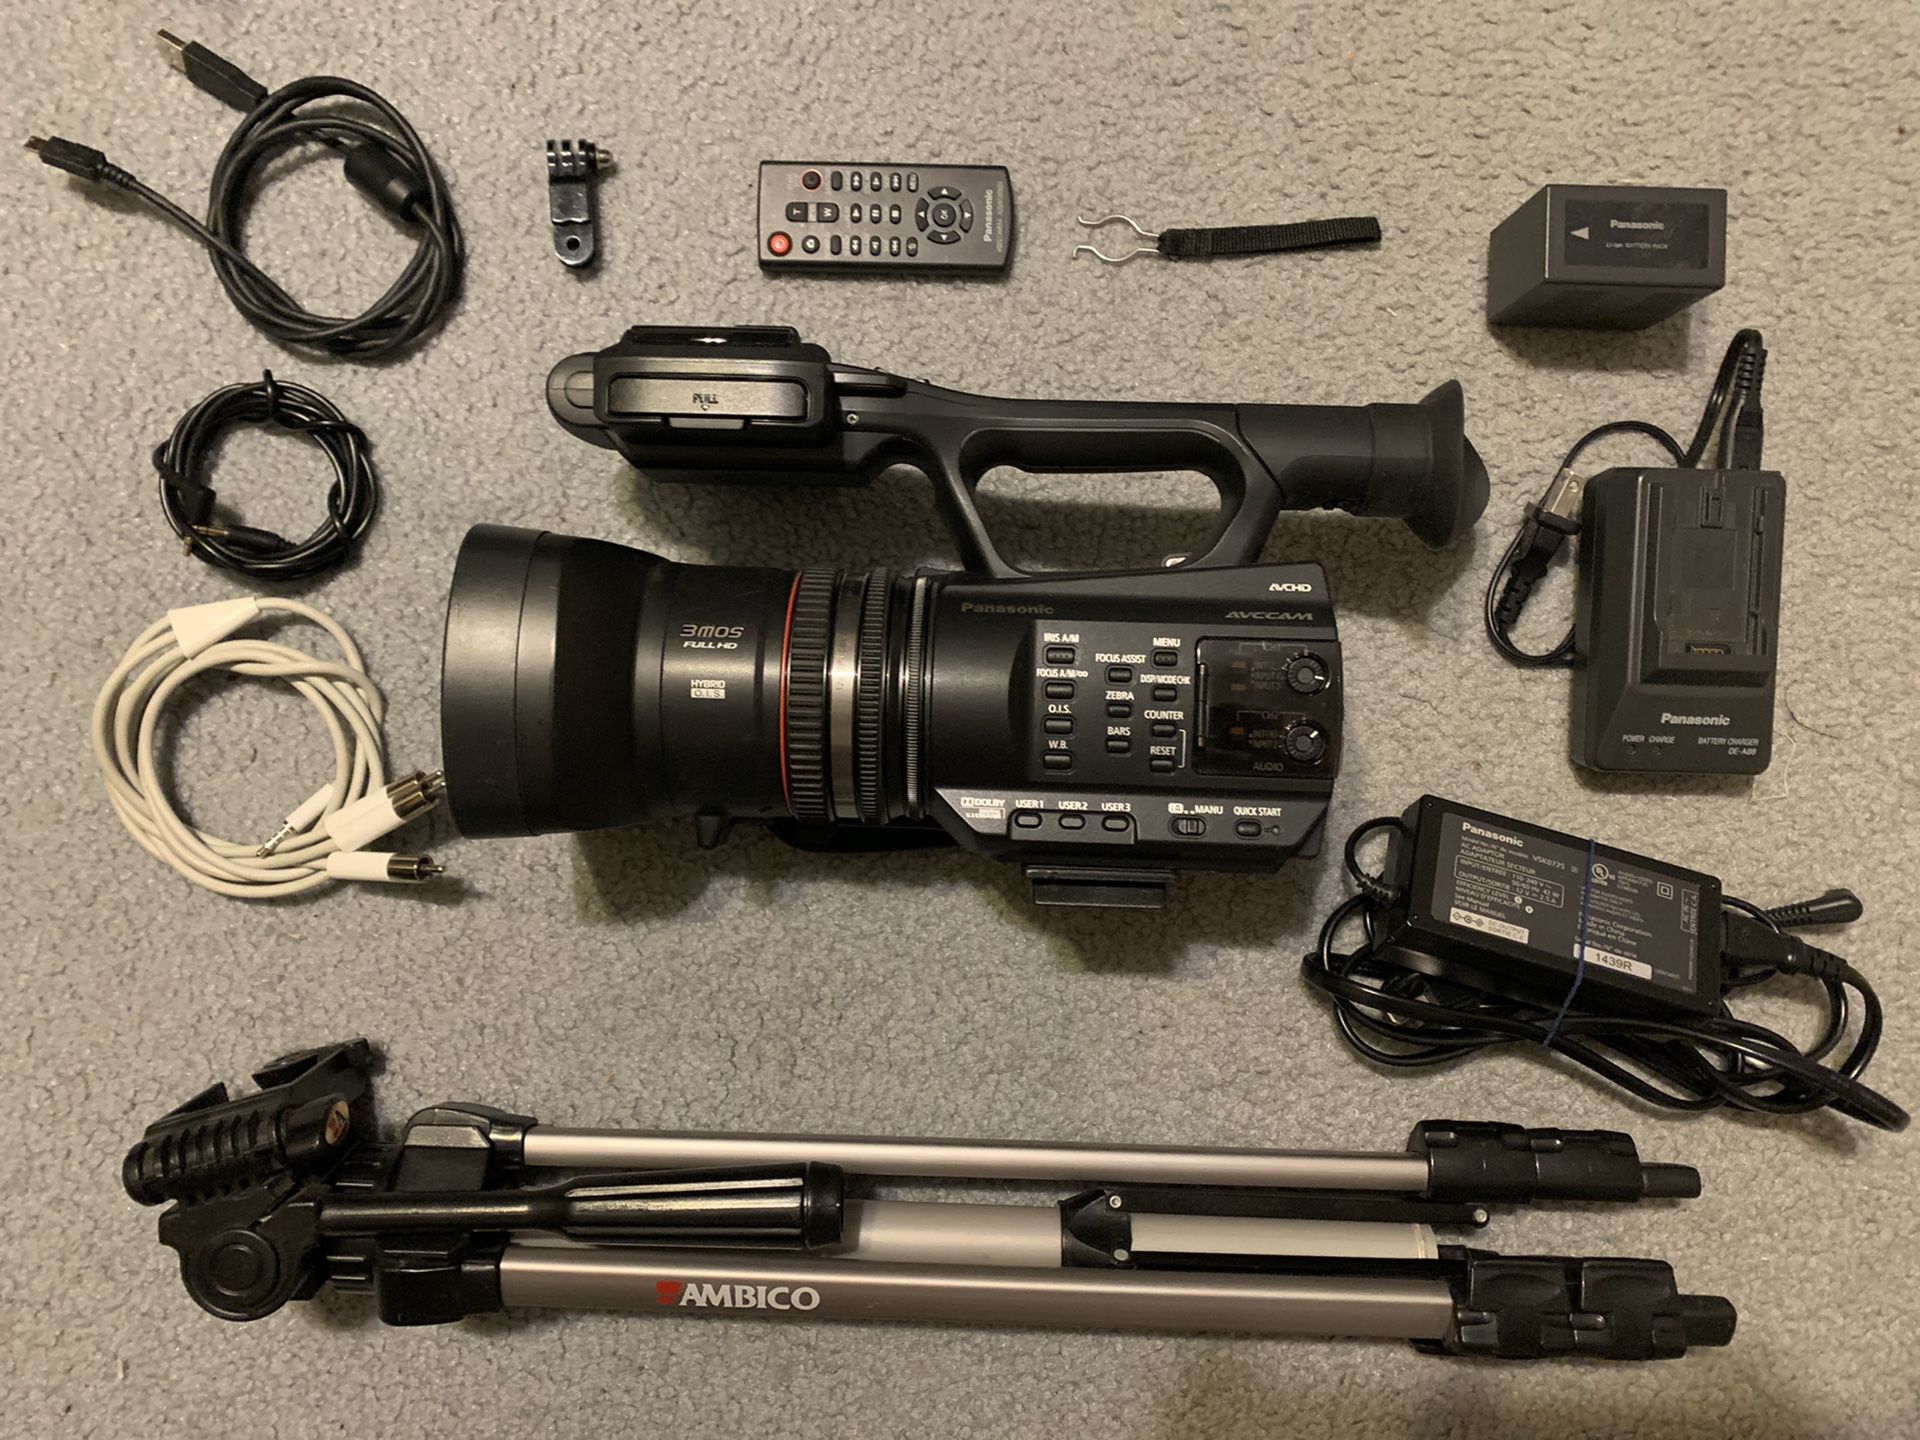 Panasonic AG-AC90 Full HD camera with tripod and accessories